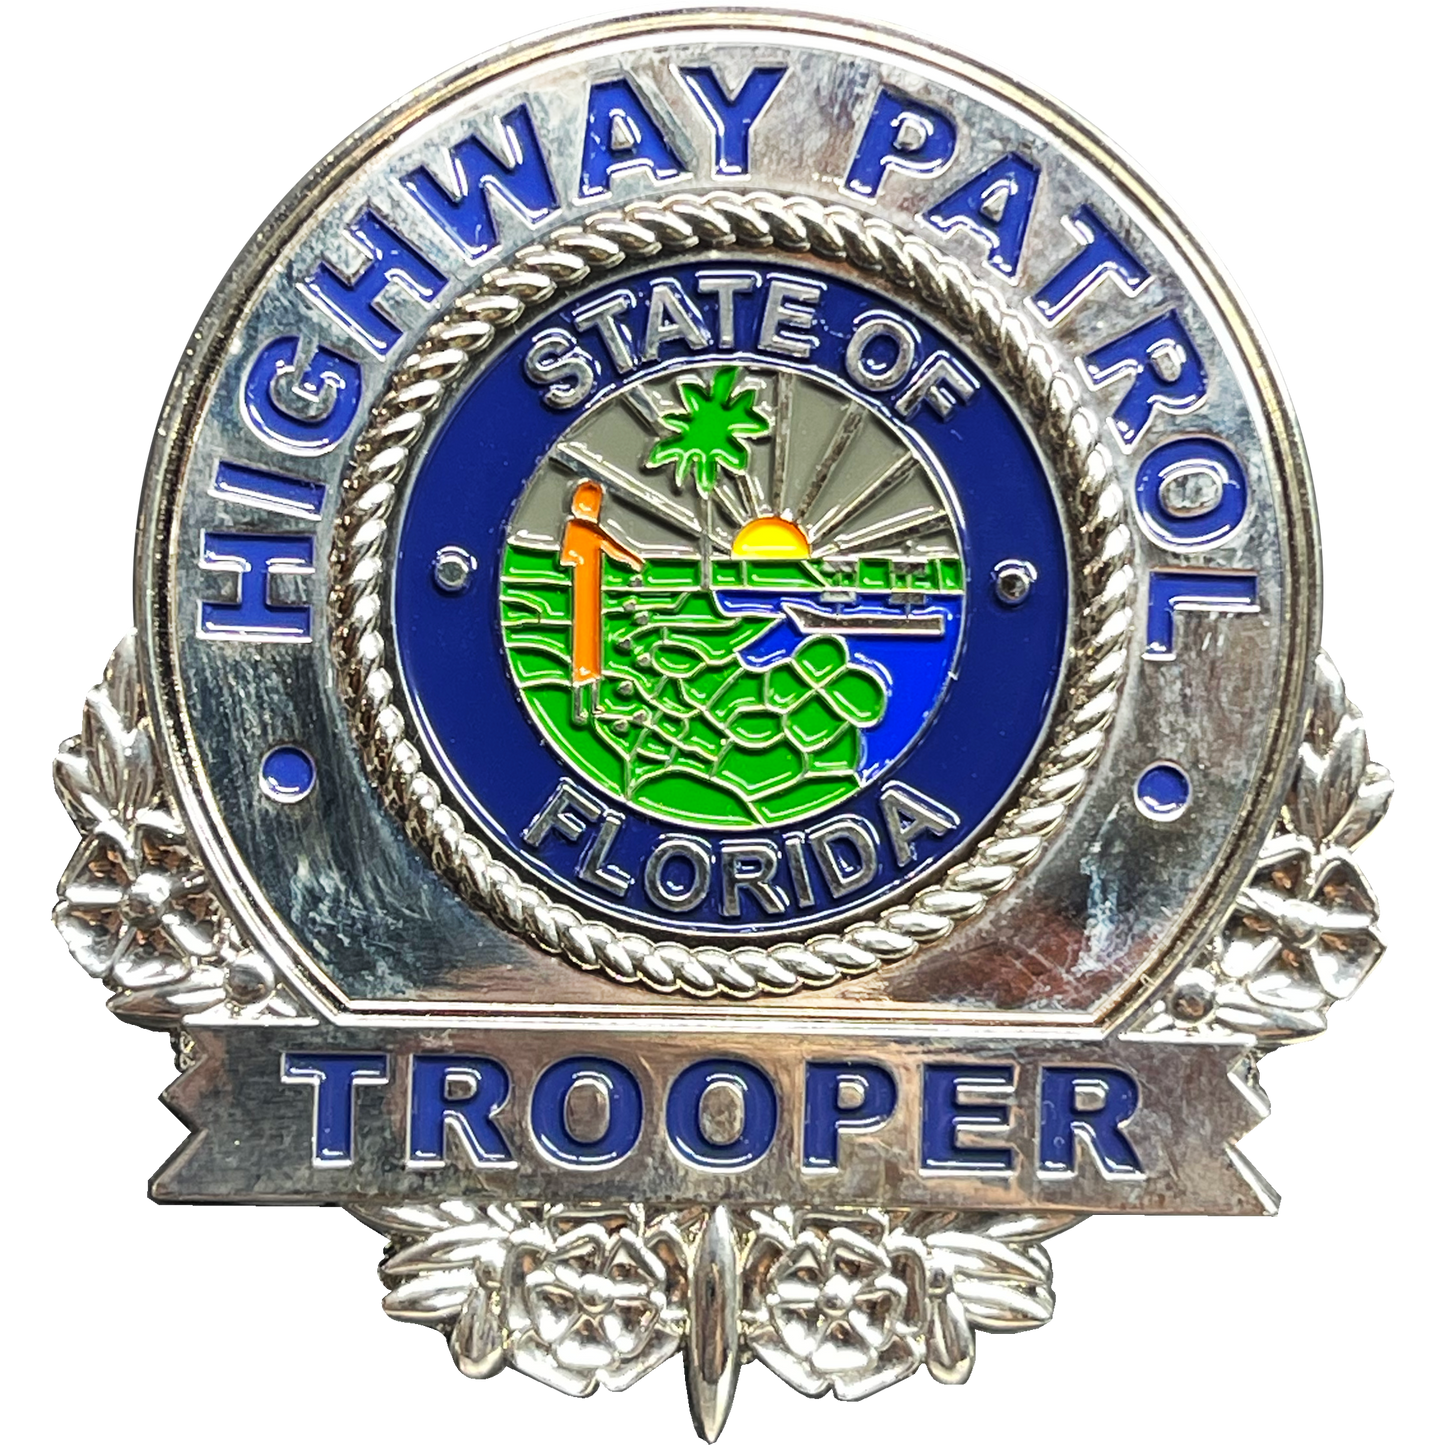 BL16-009 FHP Florida Highway Patrol Trooper Thin Blue Line Police Challenge Coin